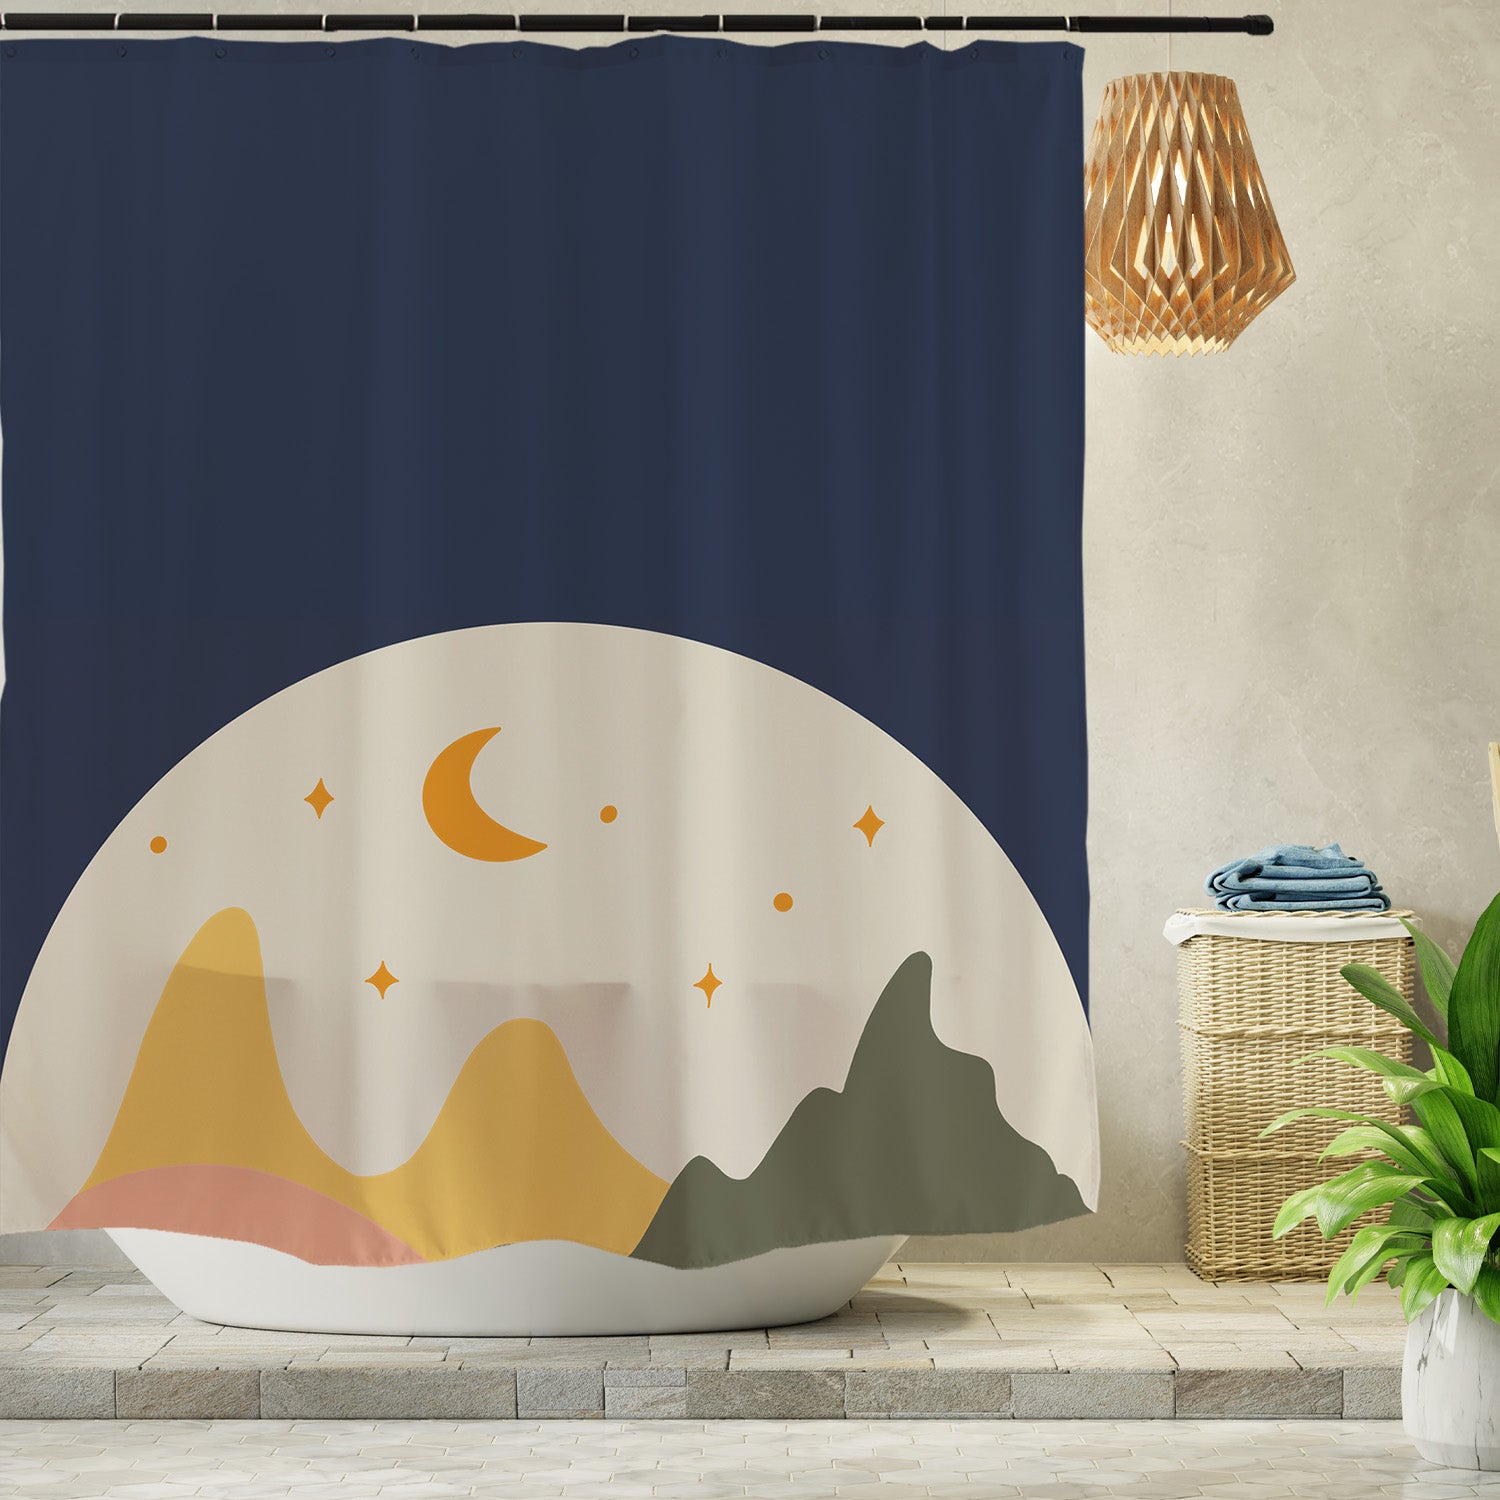 Feblilac  Brown Background Moon Mountains  Shower Curtain with Hooks